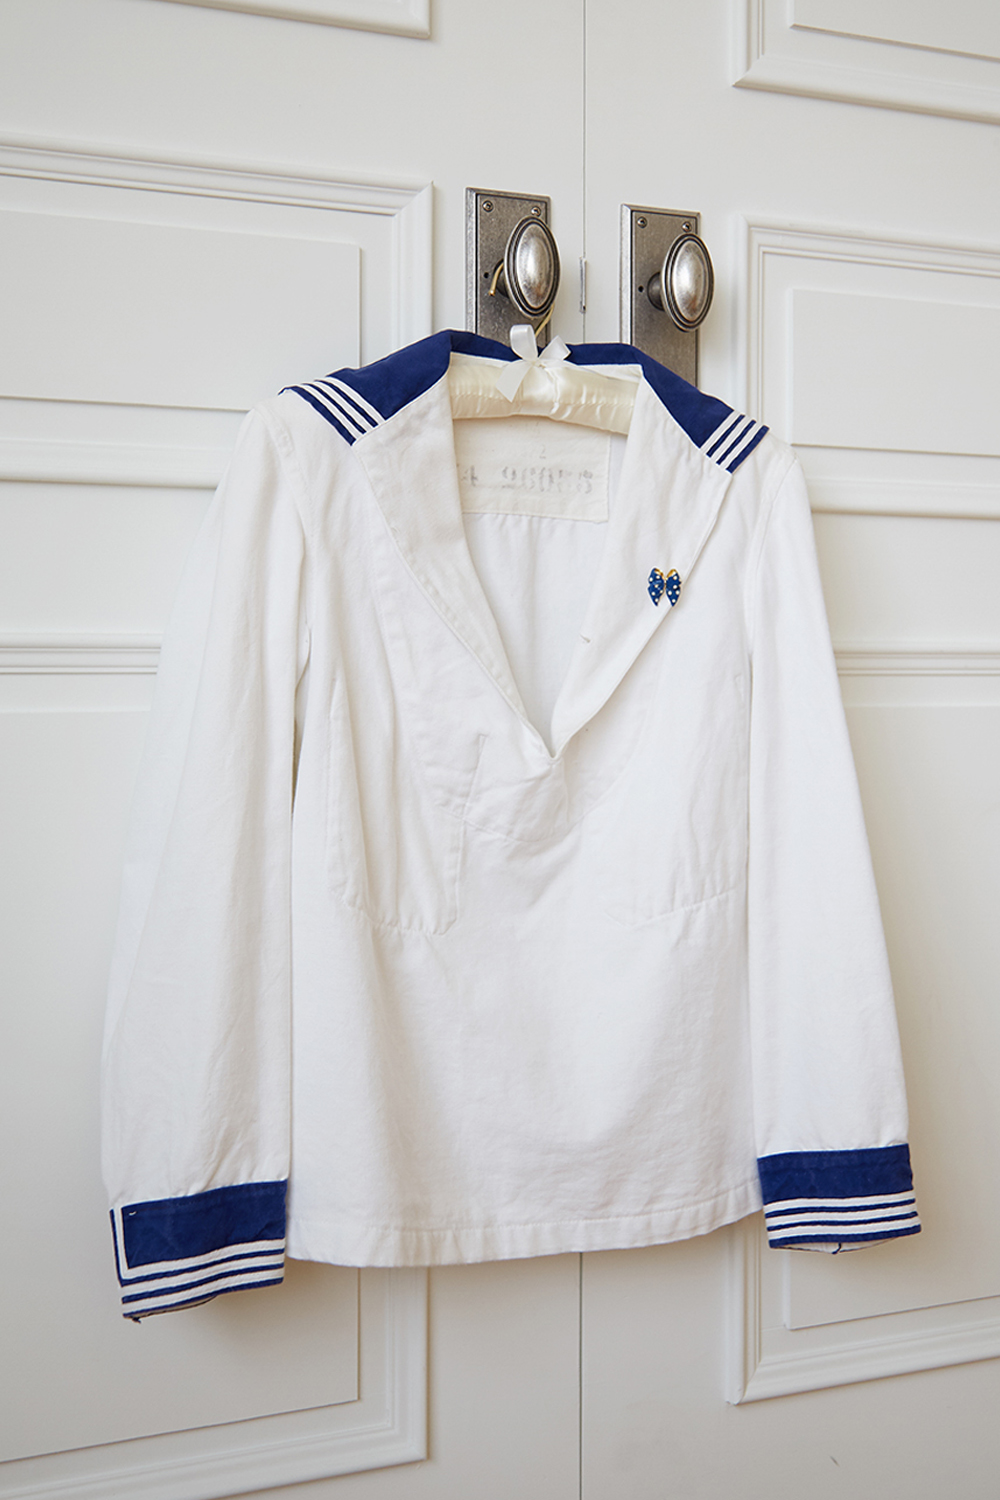 WWll french navy sailor blouse - vintage lover club